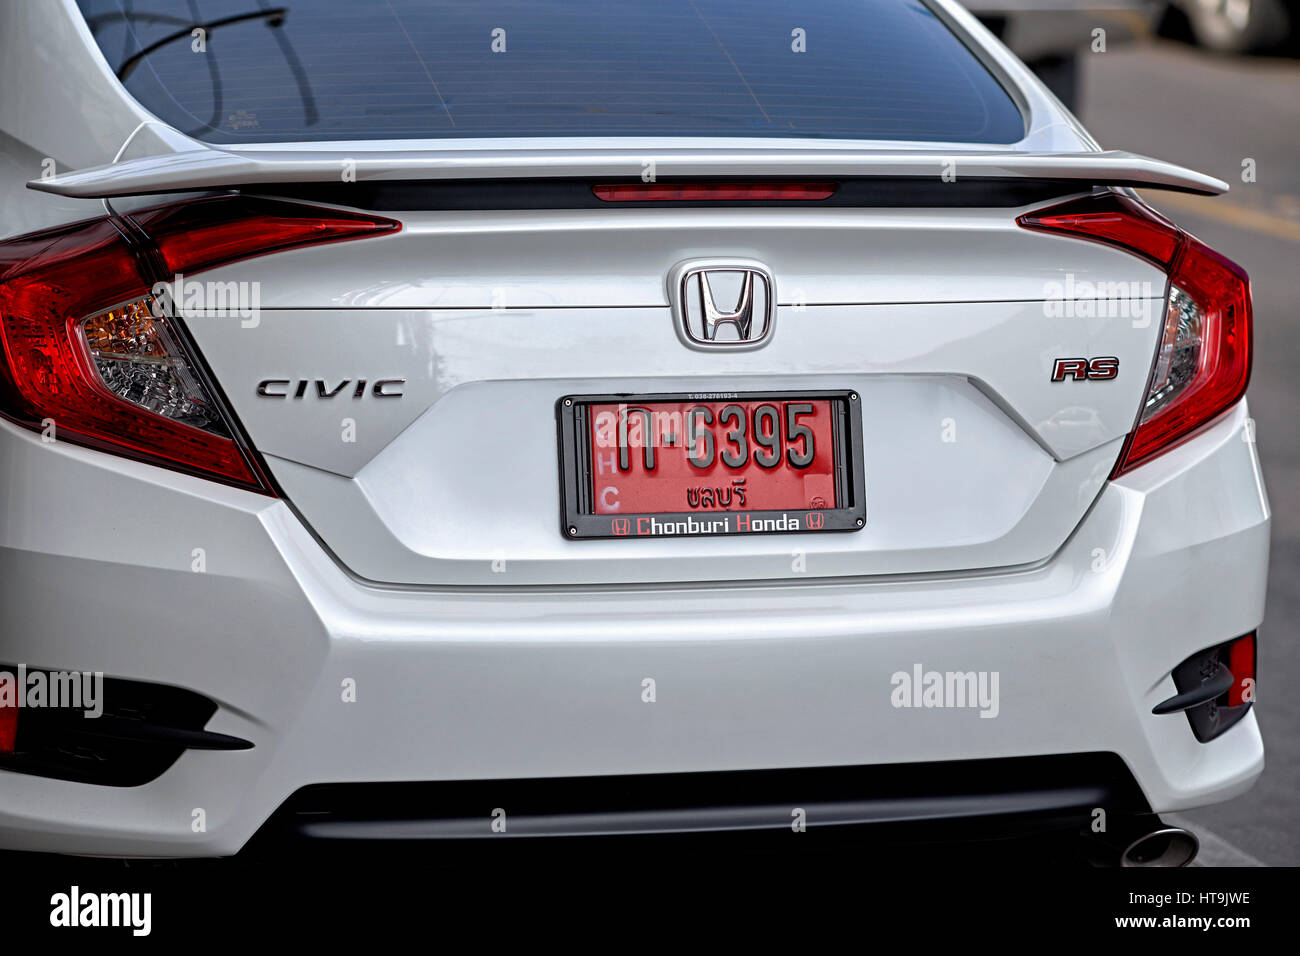 Honda Civic RS car, 2017 model in white. Red license plate signifying new ownership. Thailand Southeast Asia Stock Photo